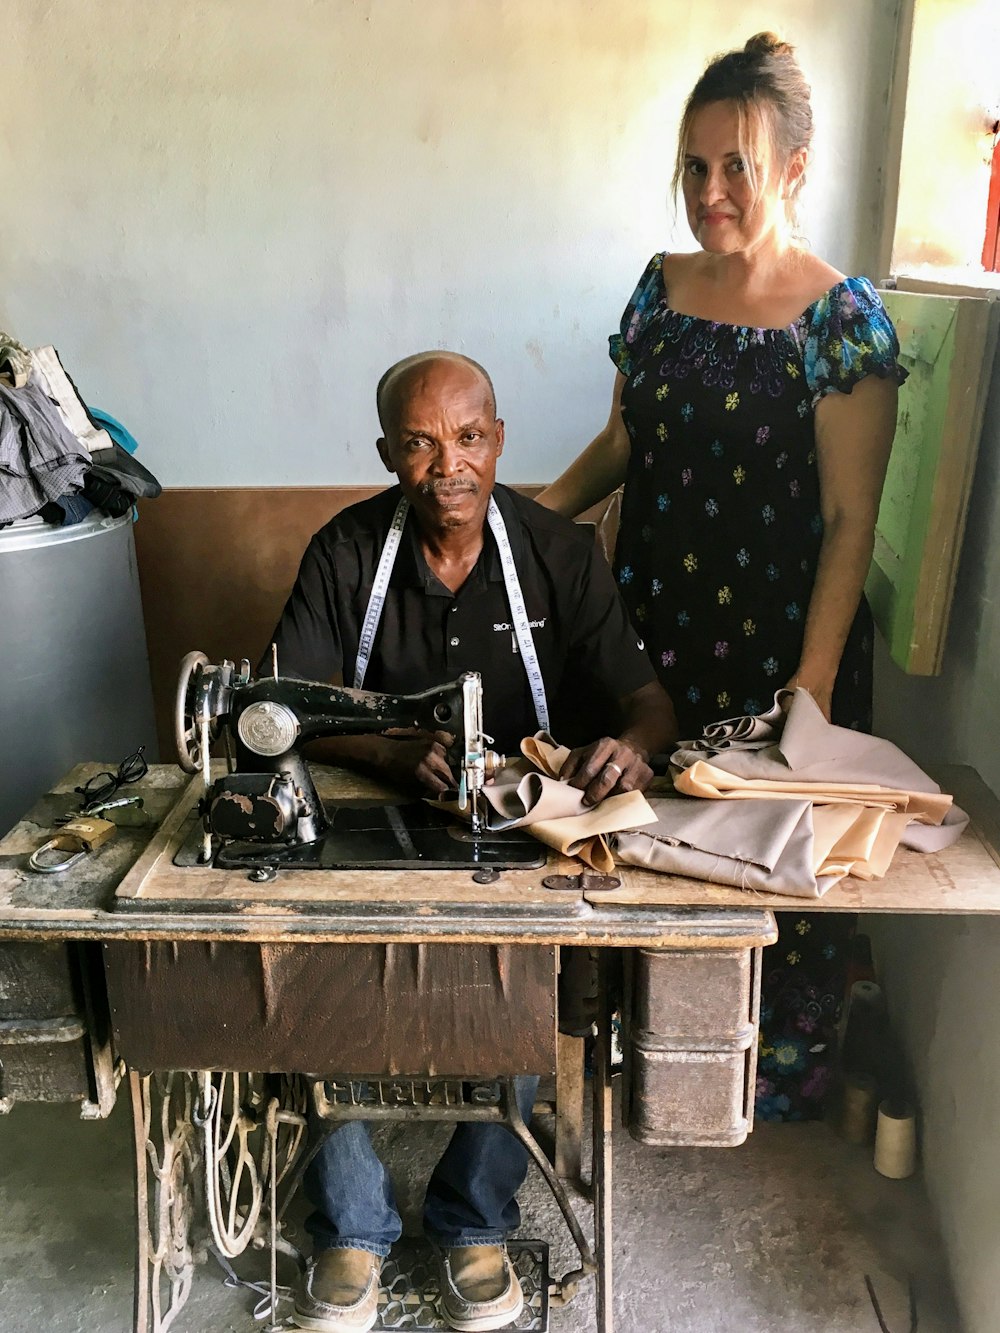 man and woman standing beside sewing machine